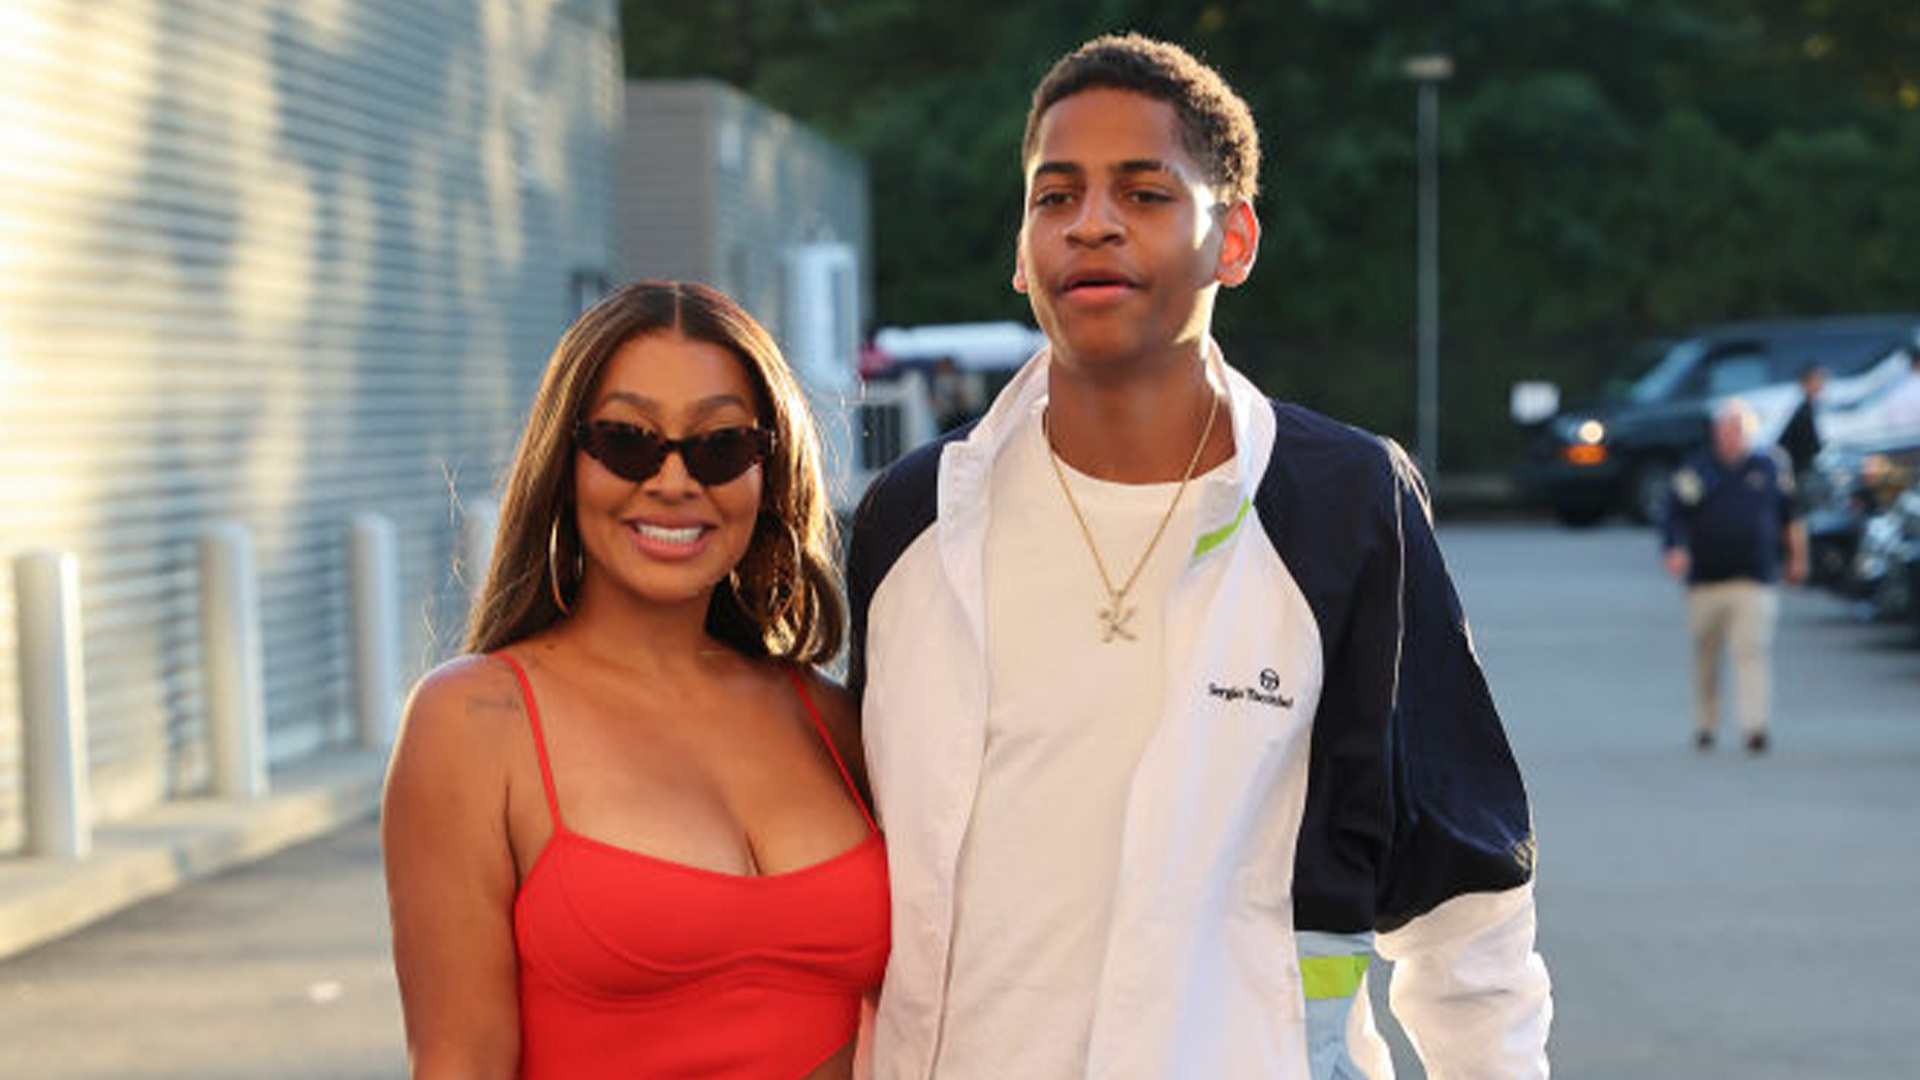 La La Anthony To Gift Her Son A Rare Spider-Man Card She Pulled Worth $100K